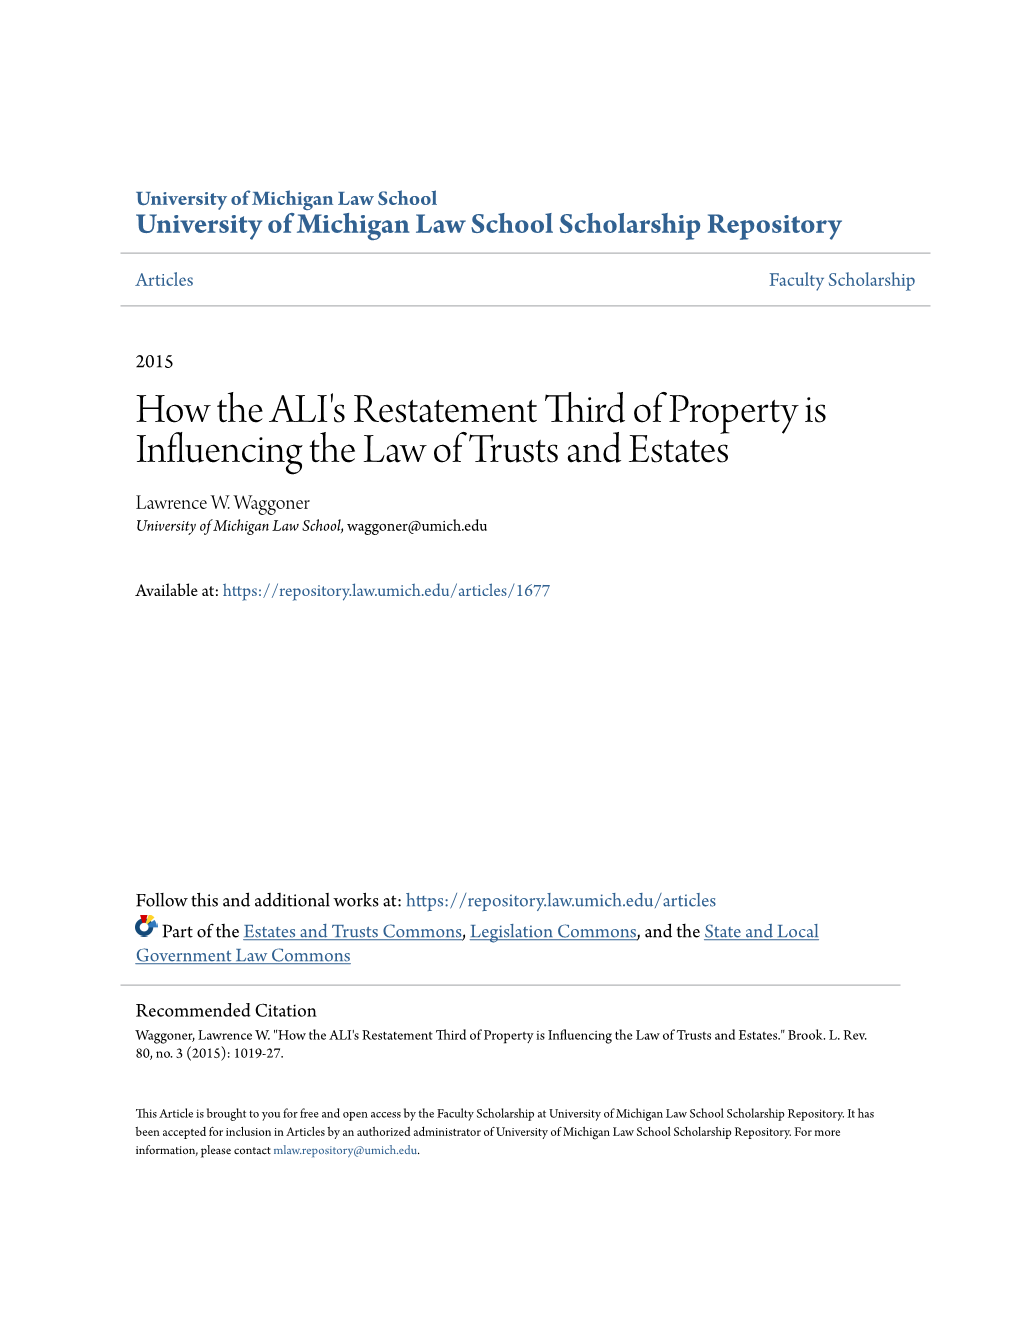 How the ALI's Restatement Third of Property Is Influencing the Law of Trusts and Estates Lawrence W